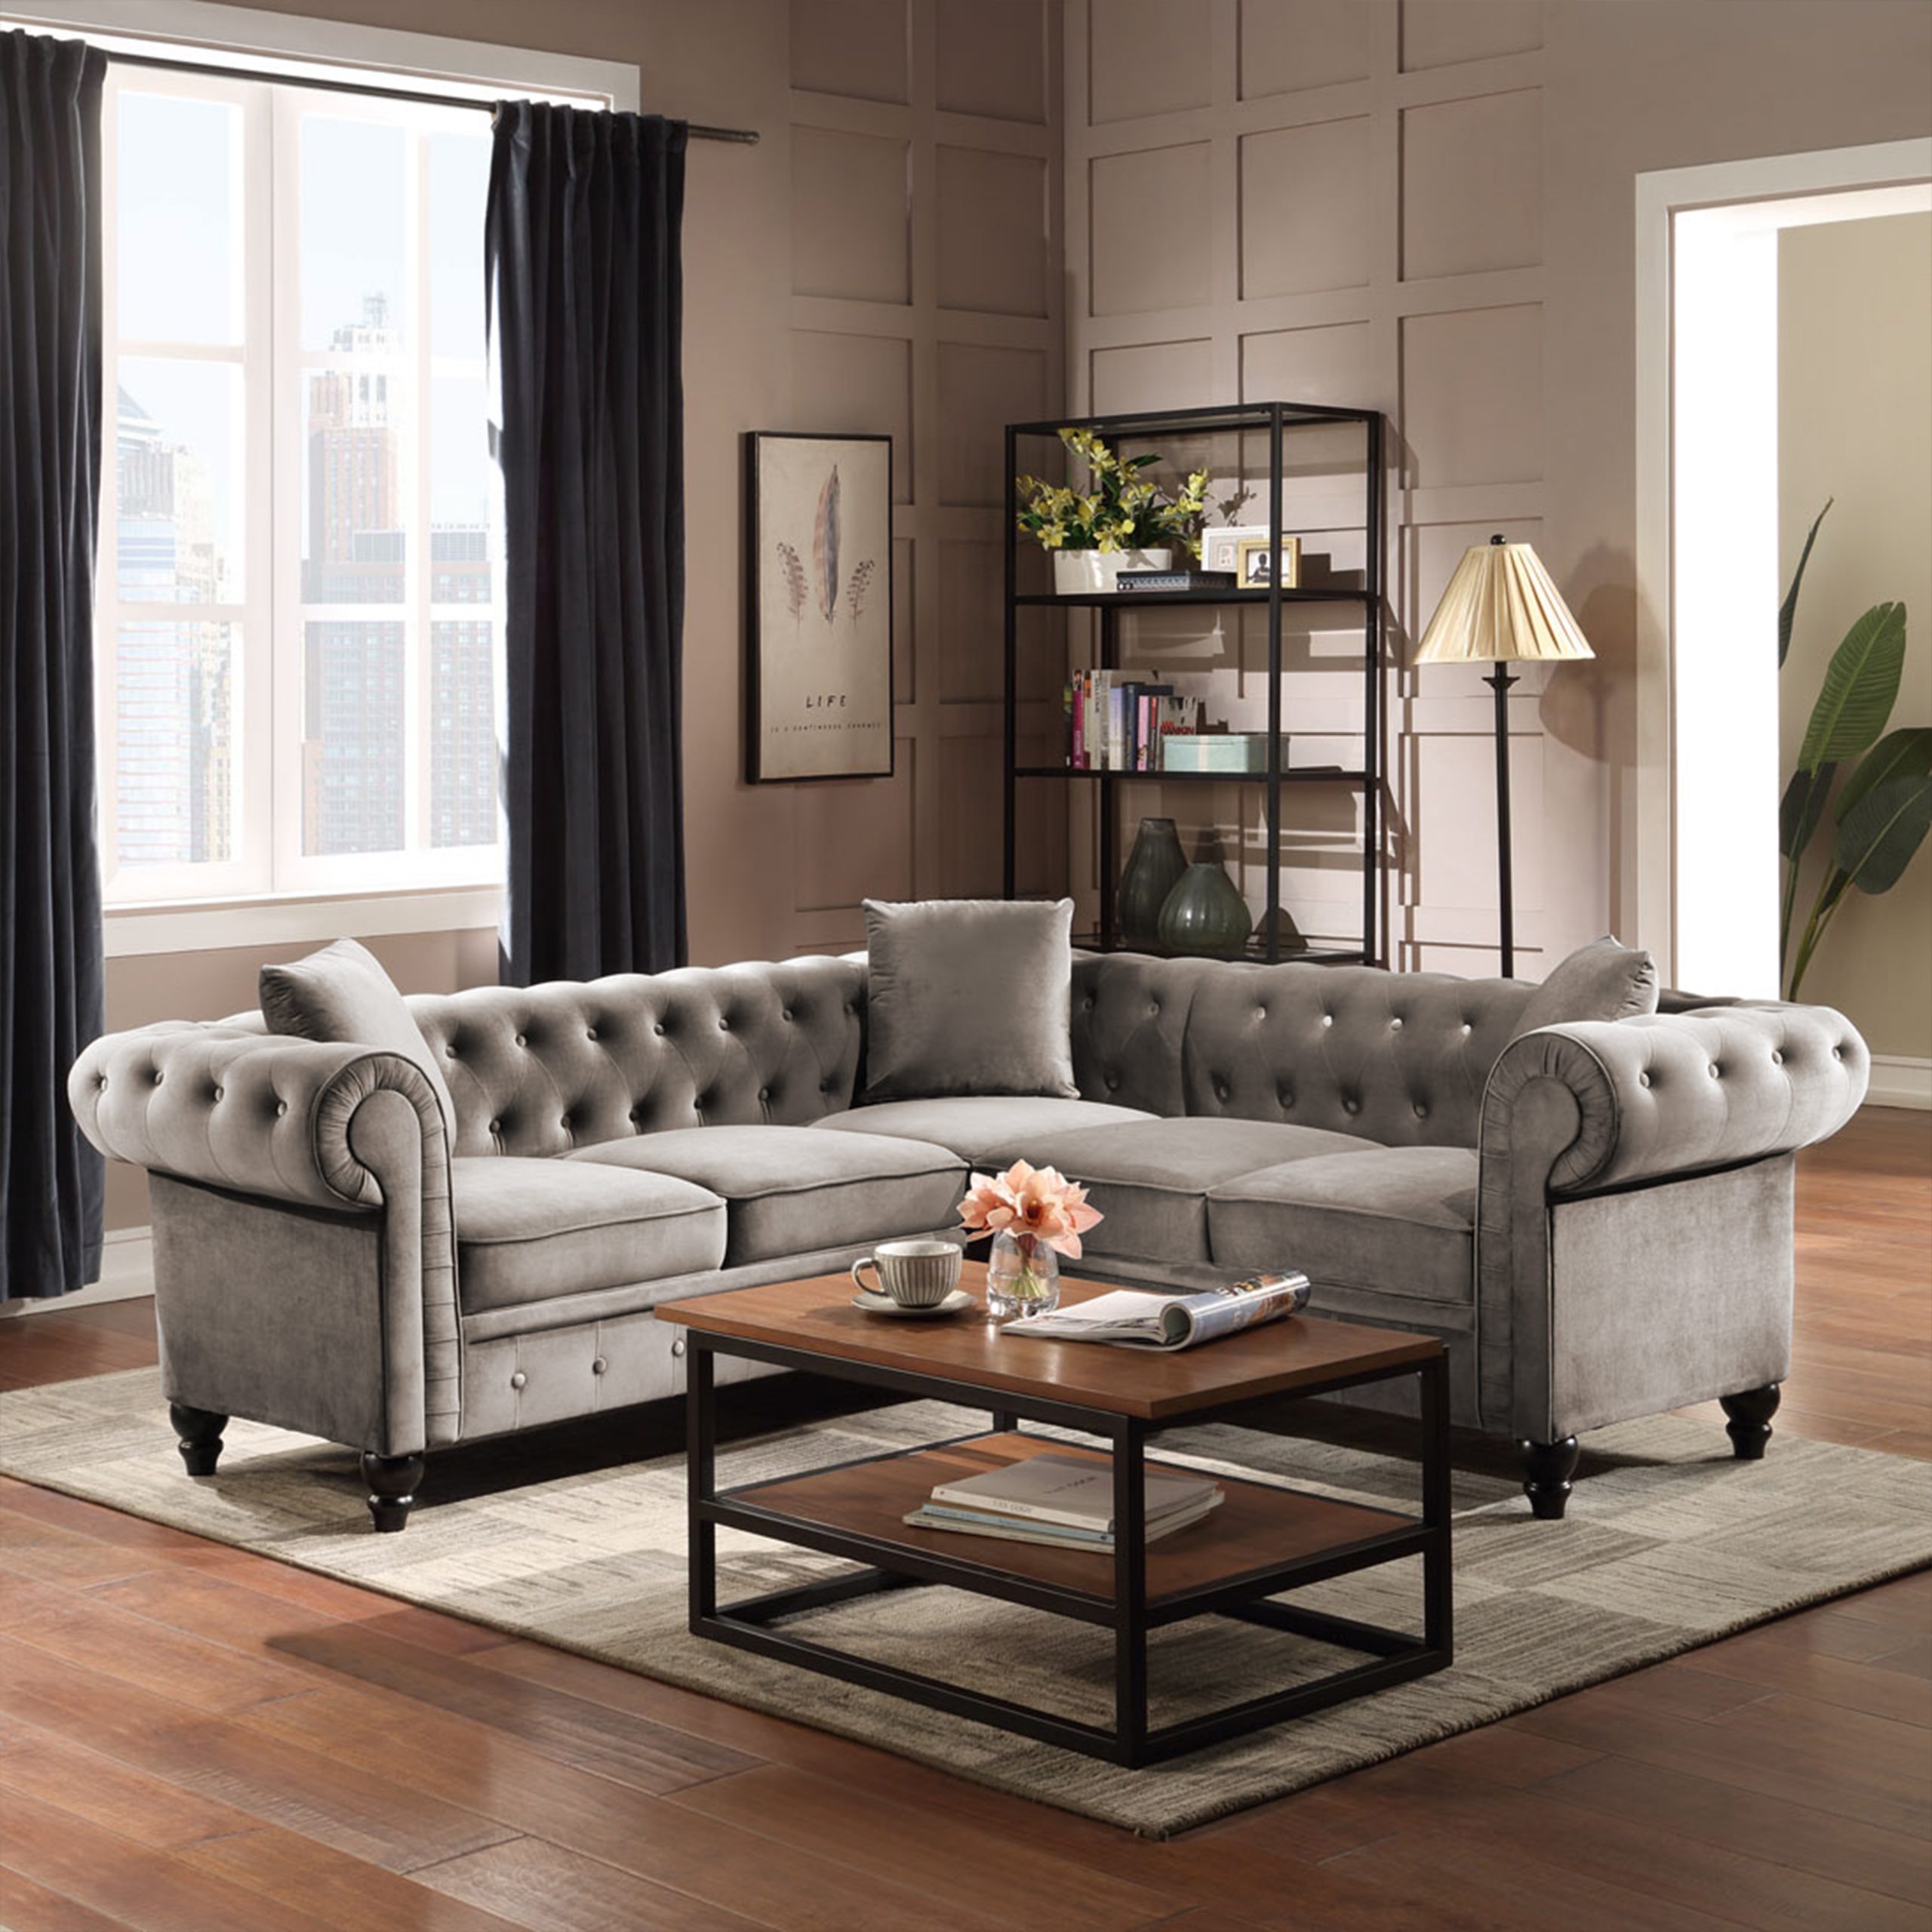 Classic Chesterfield L Shaped Sectional Sofa, 3 Pillows Included - GS000420AAE